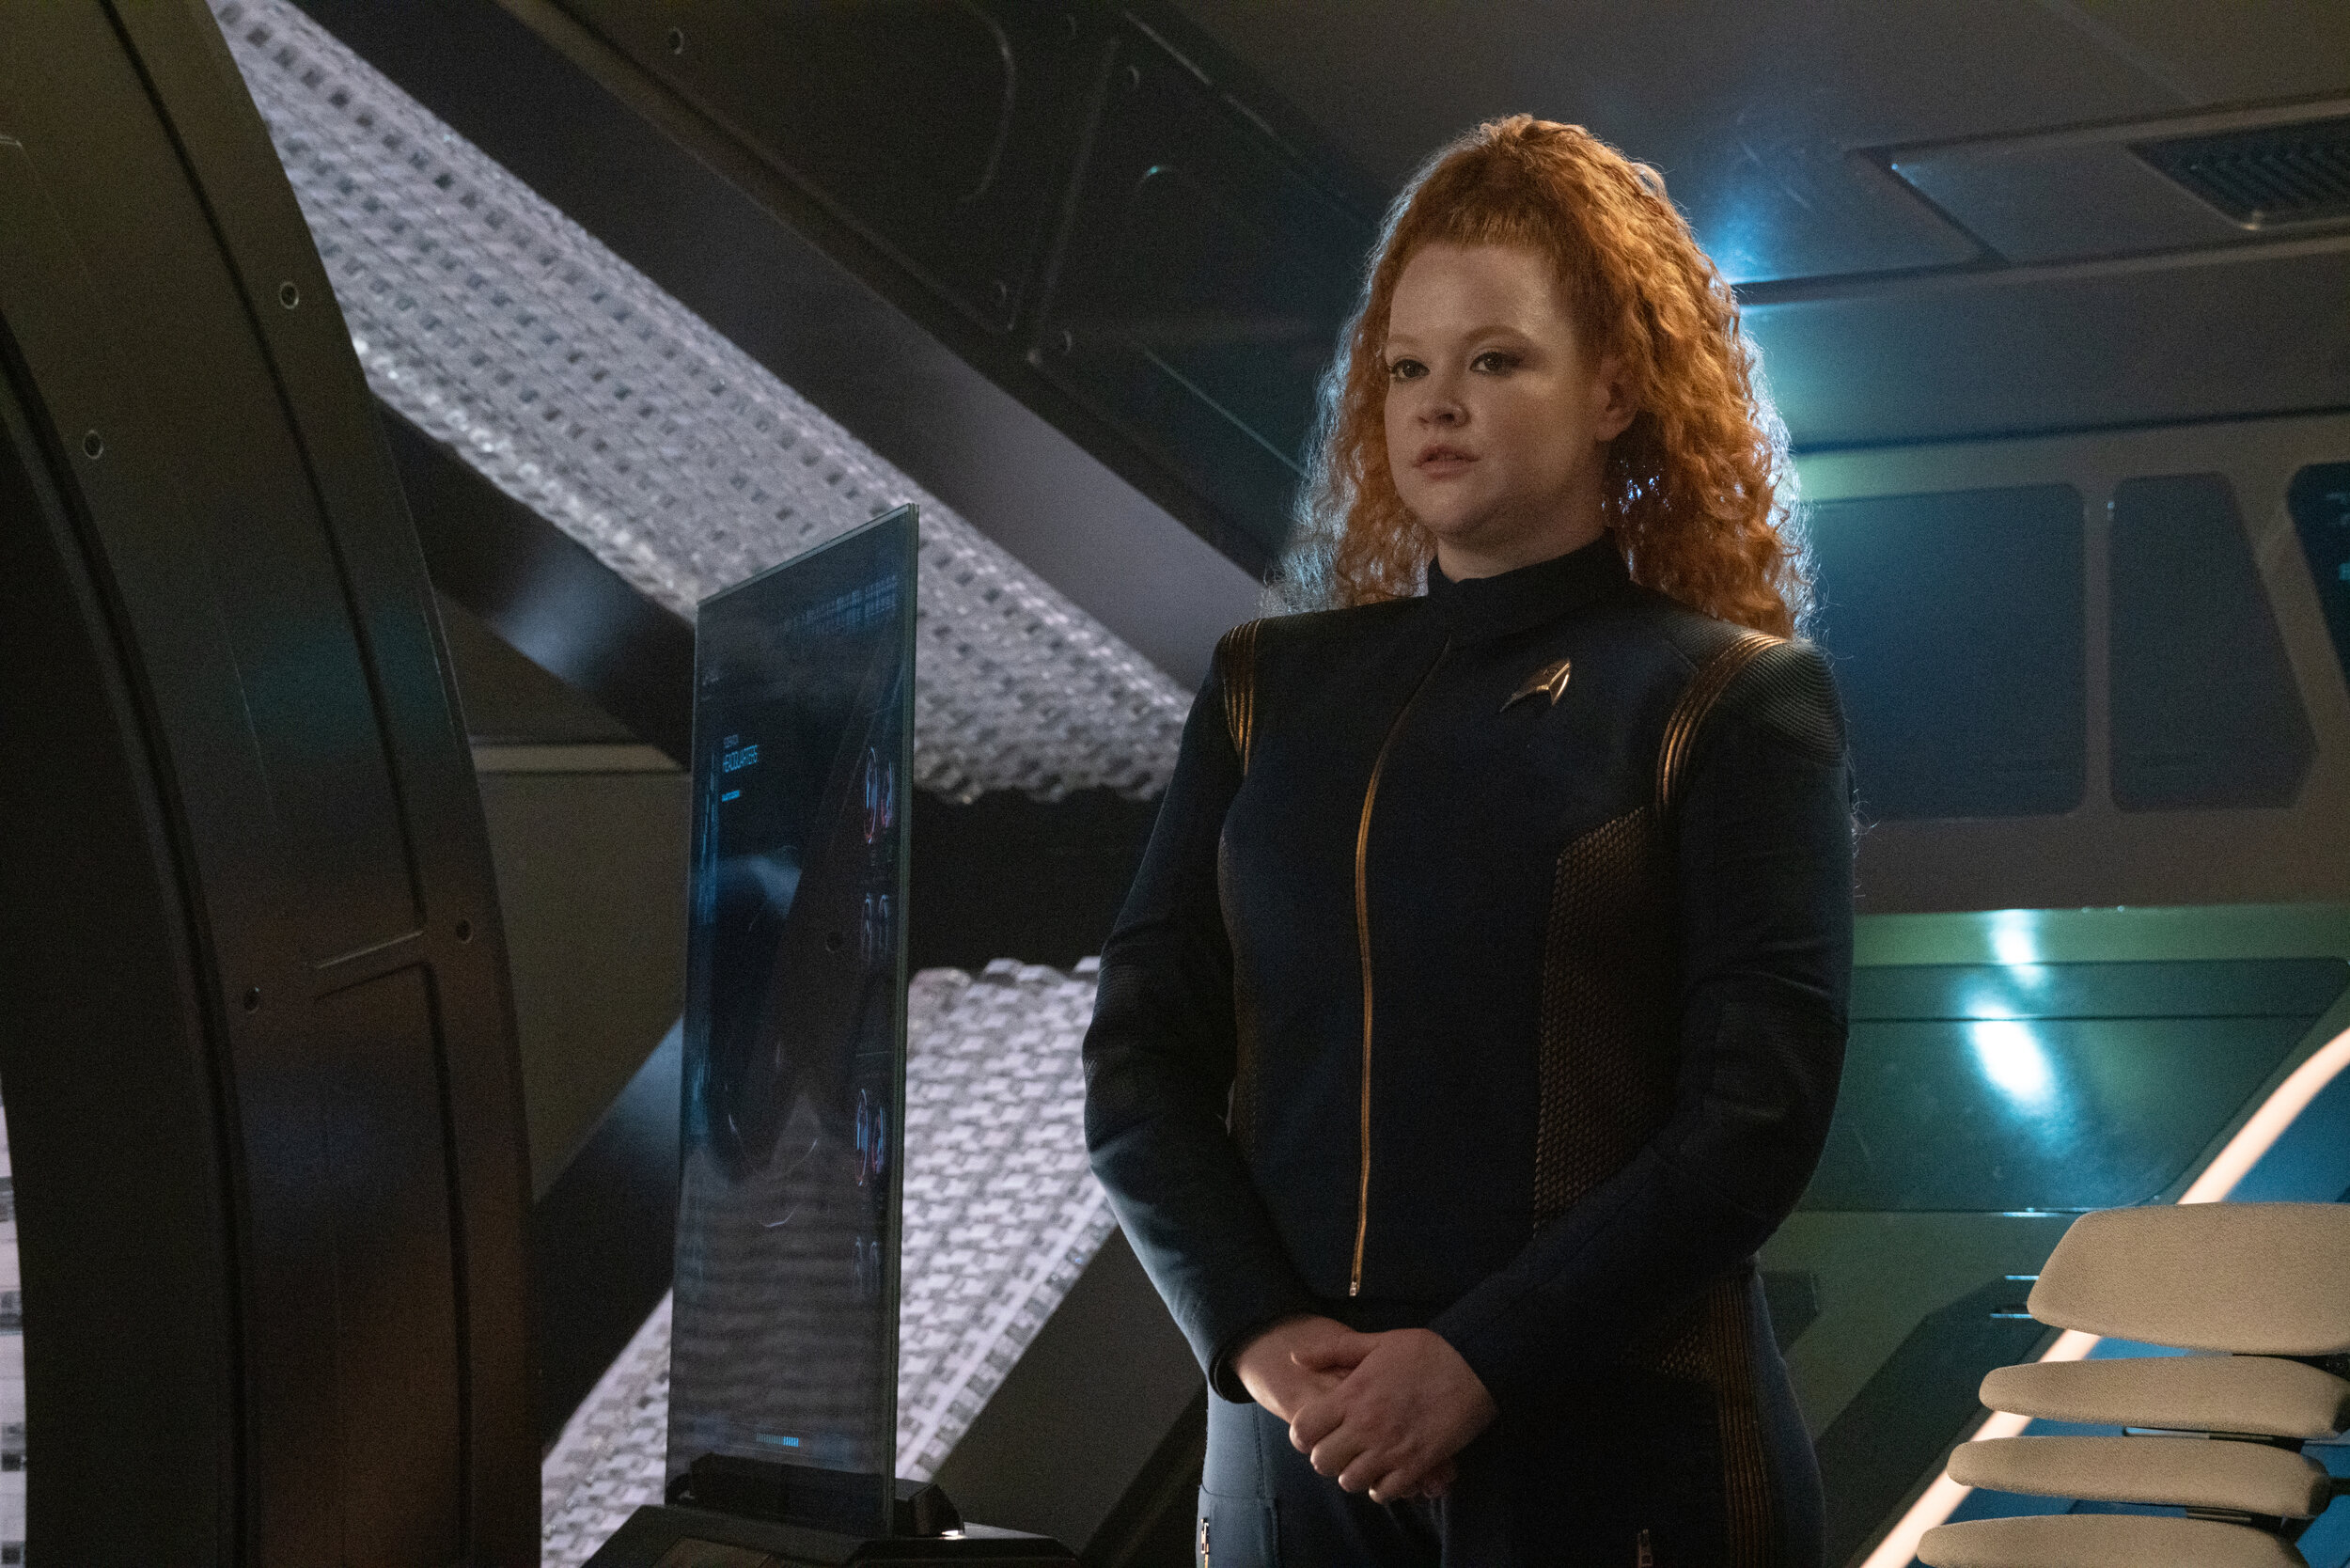   "Die Trying" -- Ep#305 -- Pictured: Mary Wiseman as Tilly of the CBS All Access series STAR TREK: DISCOVERY. Photo Cr: Michael Gibson/CBS ©2020 CBS Interactive, Inc. All Rights Reserved.  